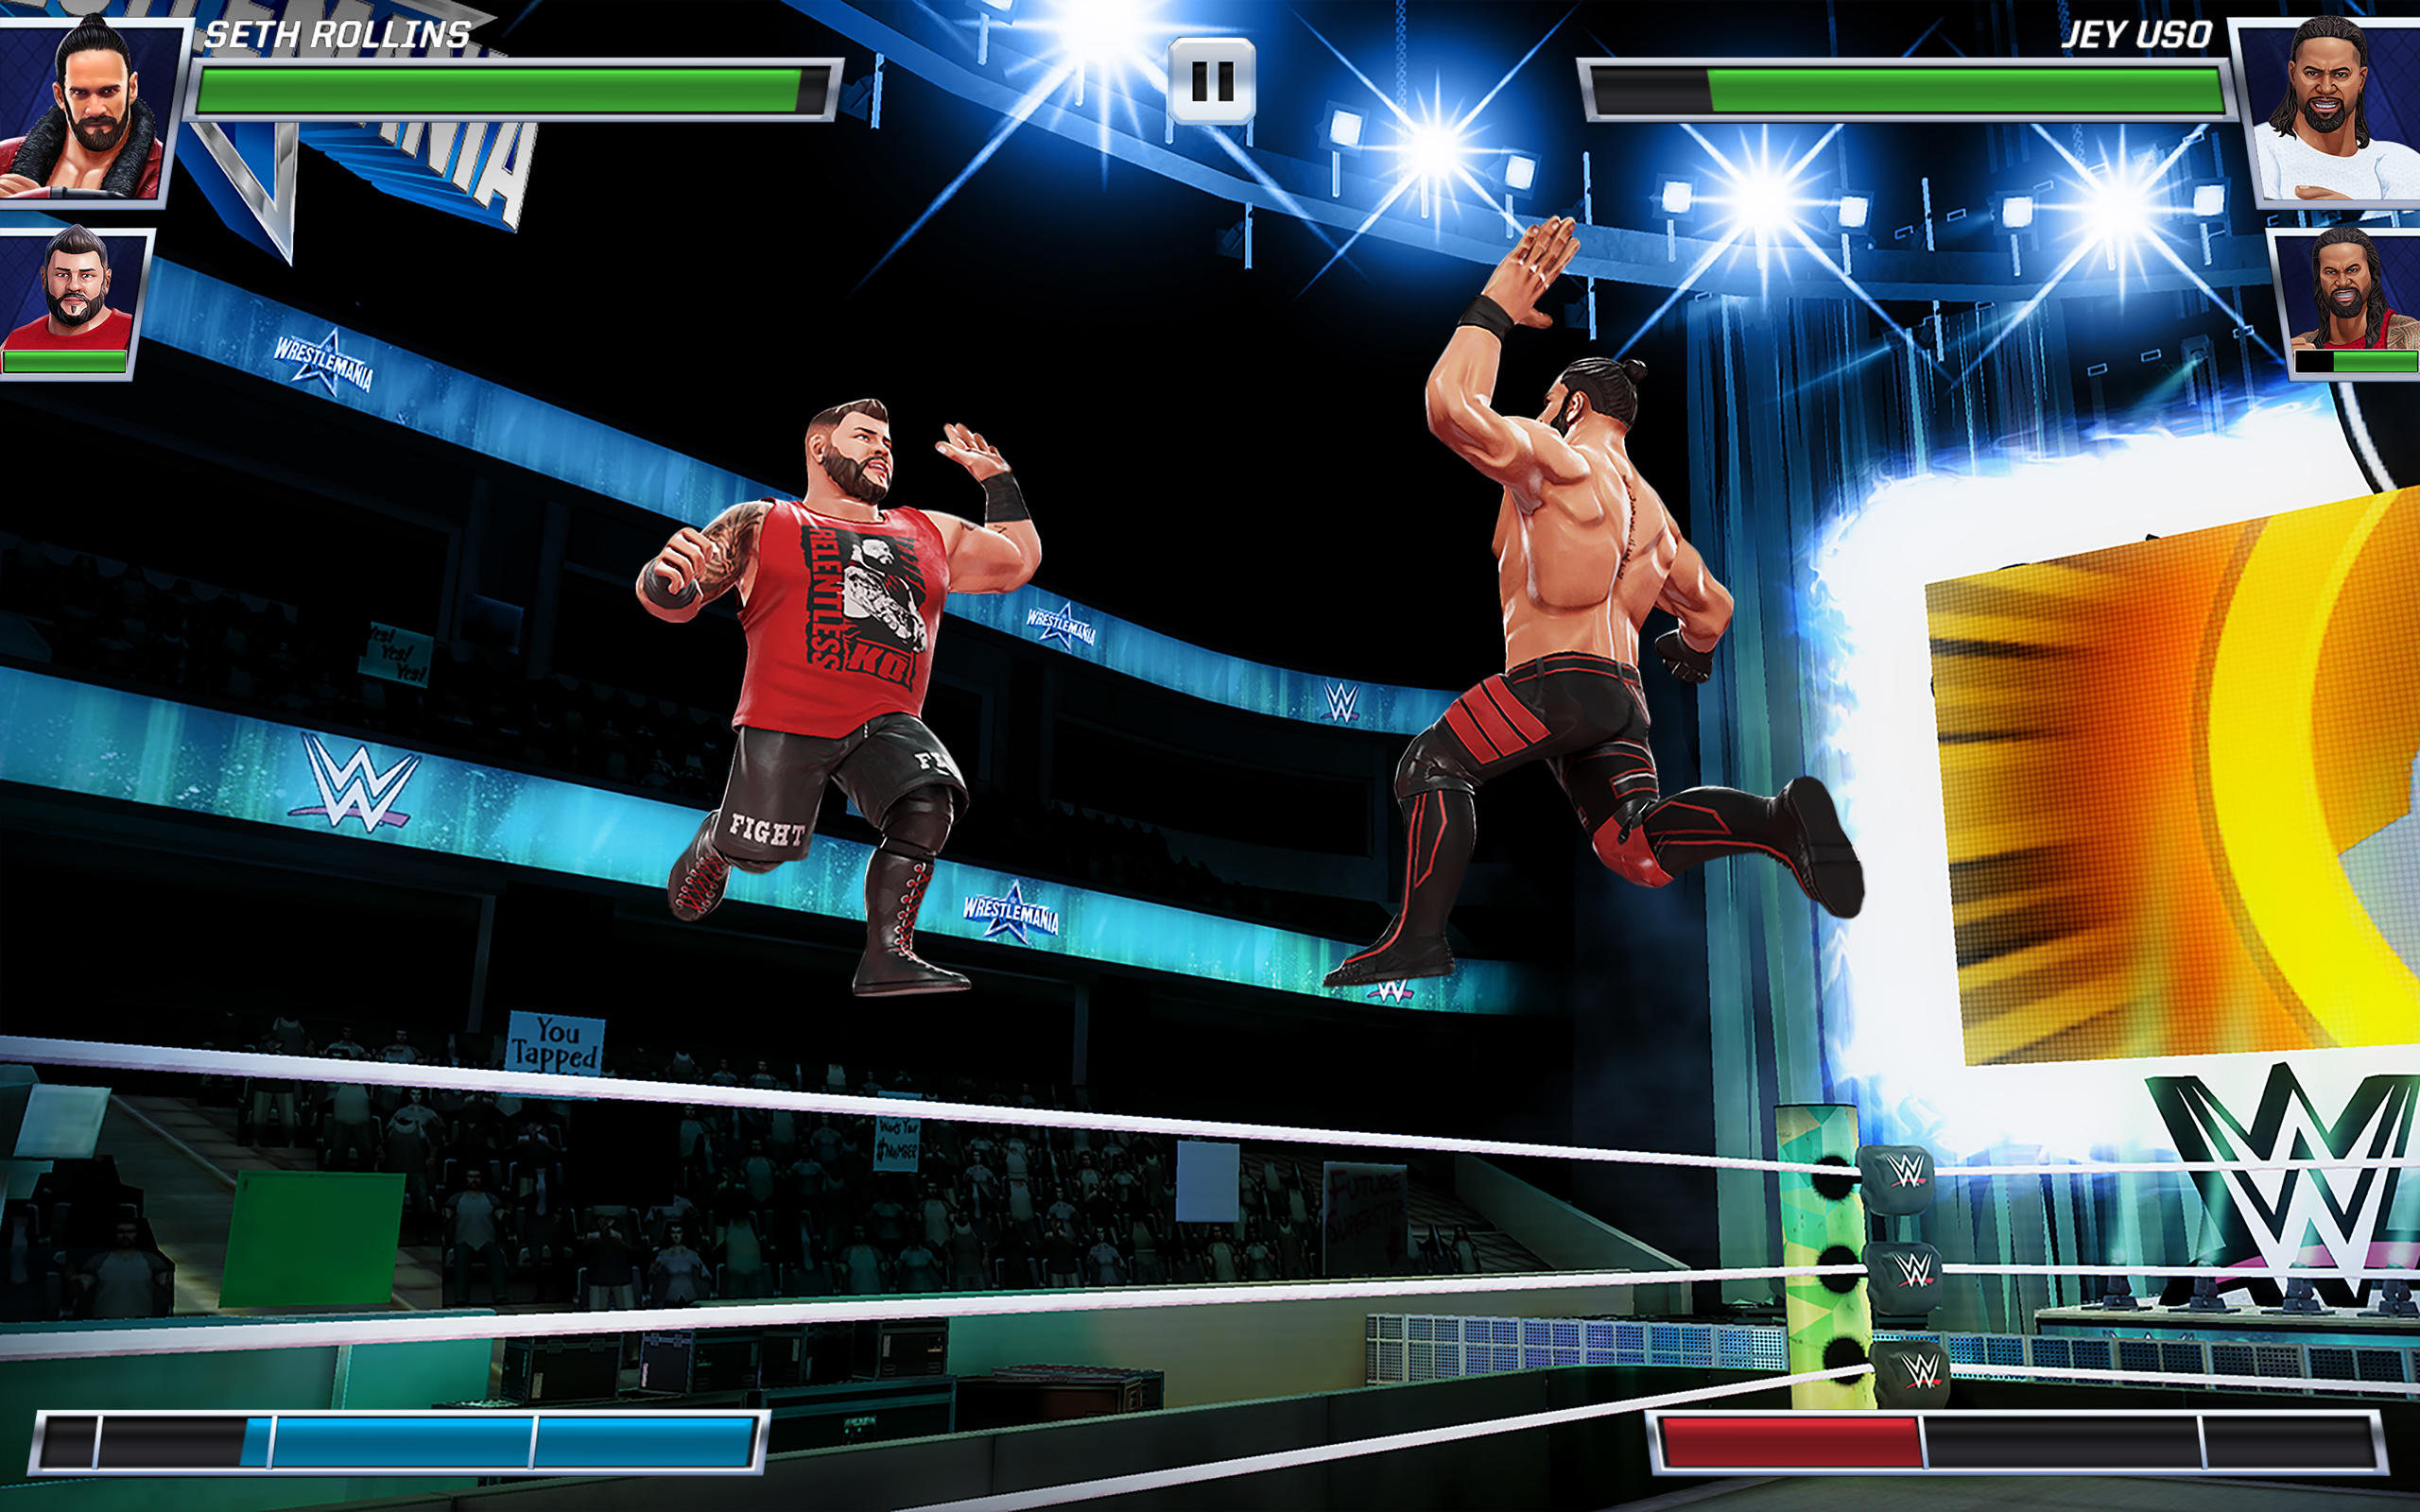 WWE 2K22 PPSSPP ANDROID Offline Best Graphics